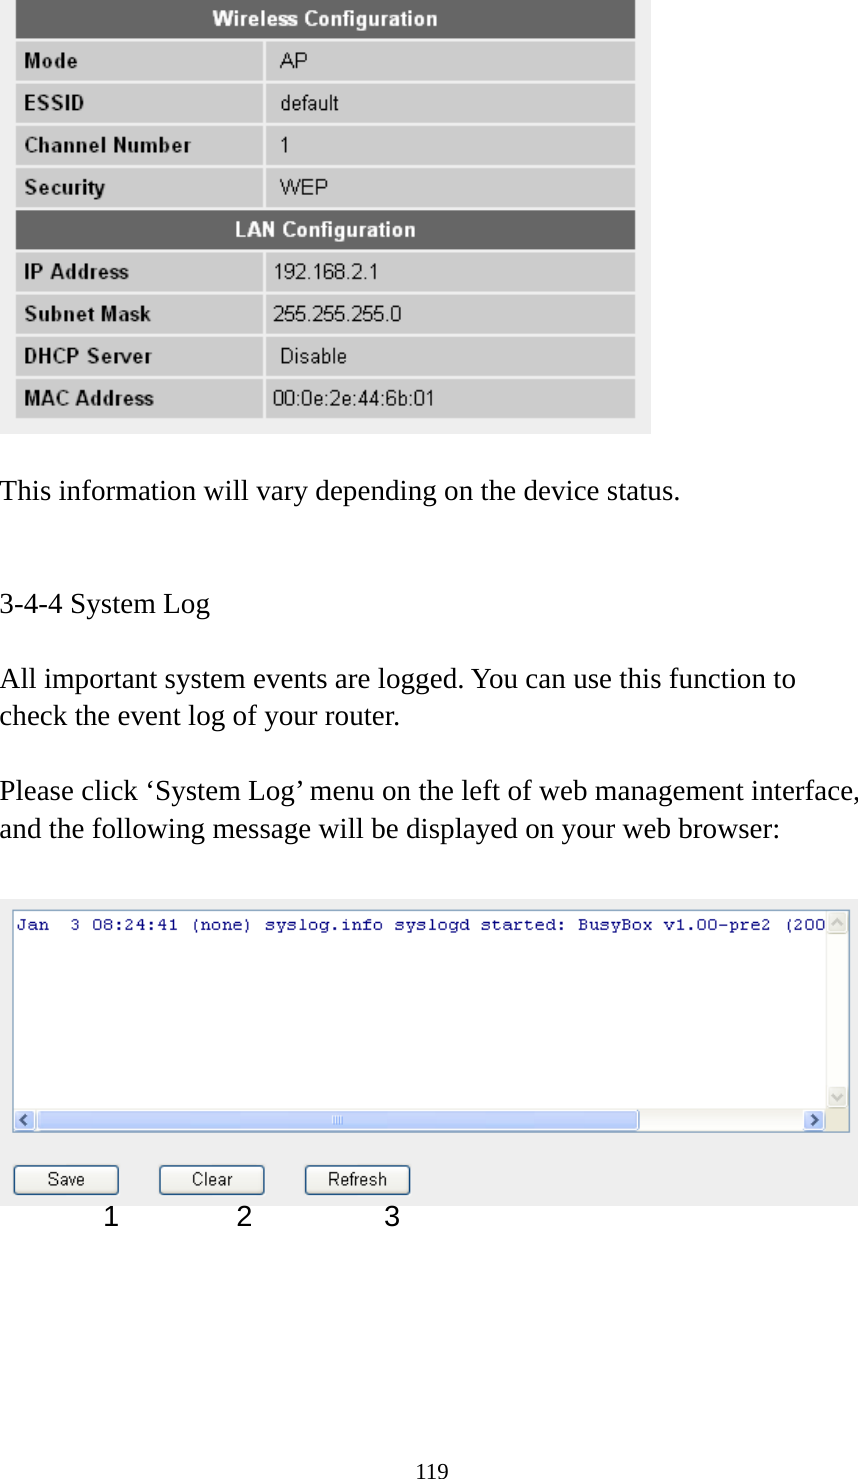 119   This information will vary depending on the device status.   3-4-4 System Log  All important system events are logged. You can use this function to check the event log of your router.  Please click ‘System Log’ menu on the left of web management interface, and the following message will be displayed on your web browser:        1 2  3